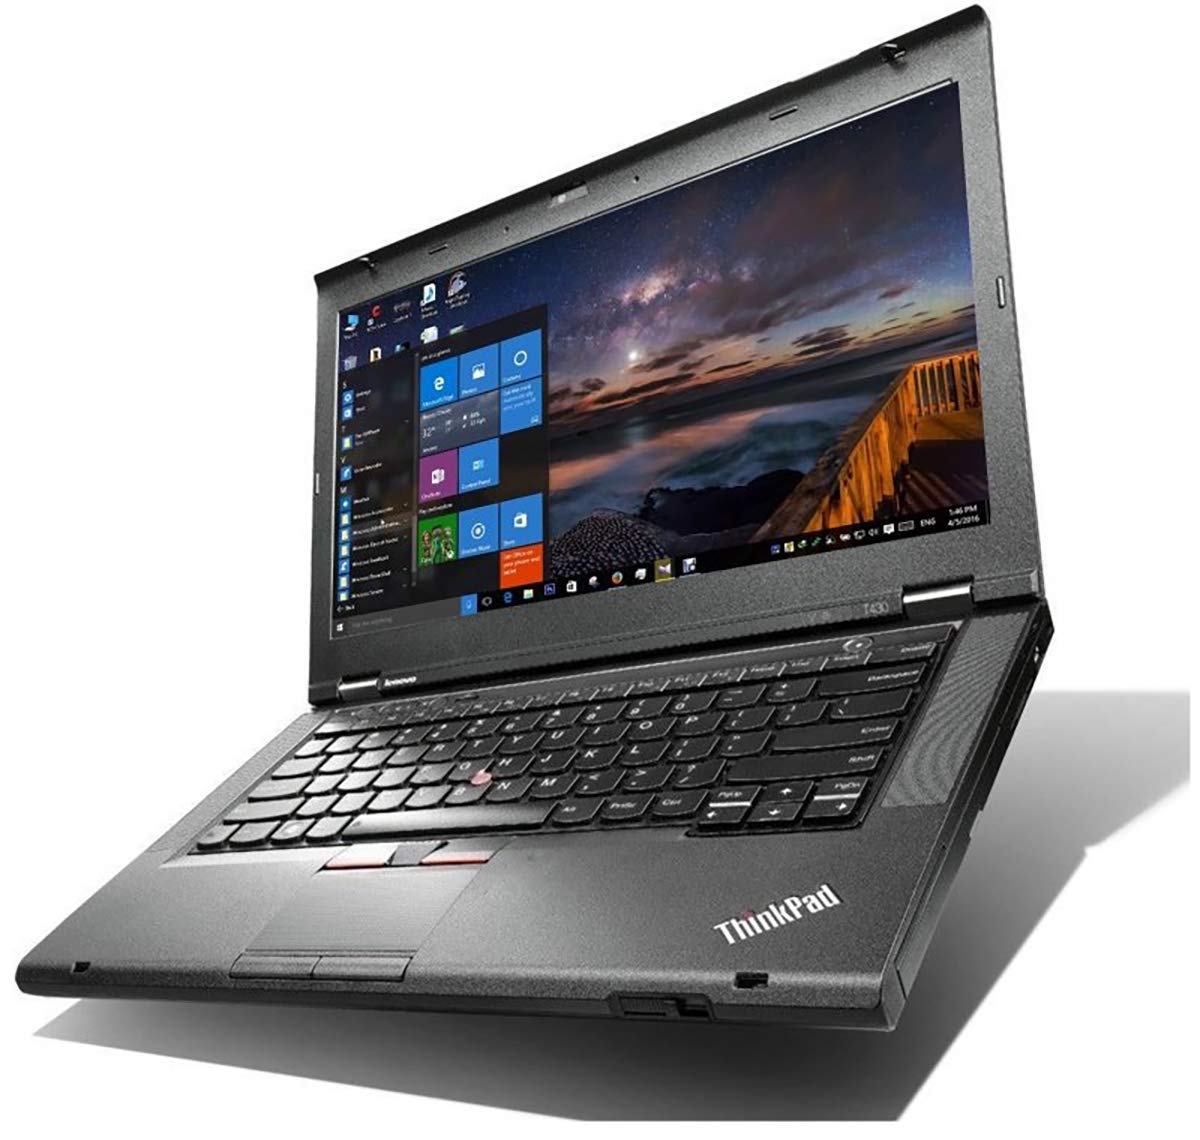 Refurbished) Lenovo T430 14-inch Laptop (Core i5/ 4GB RAM(Upgradable to 16)/320GB 10 Pro/ Intel Integrated Graphics - MyLappyhouse